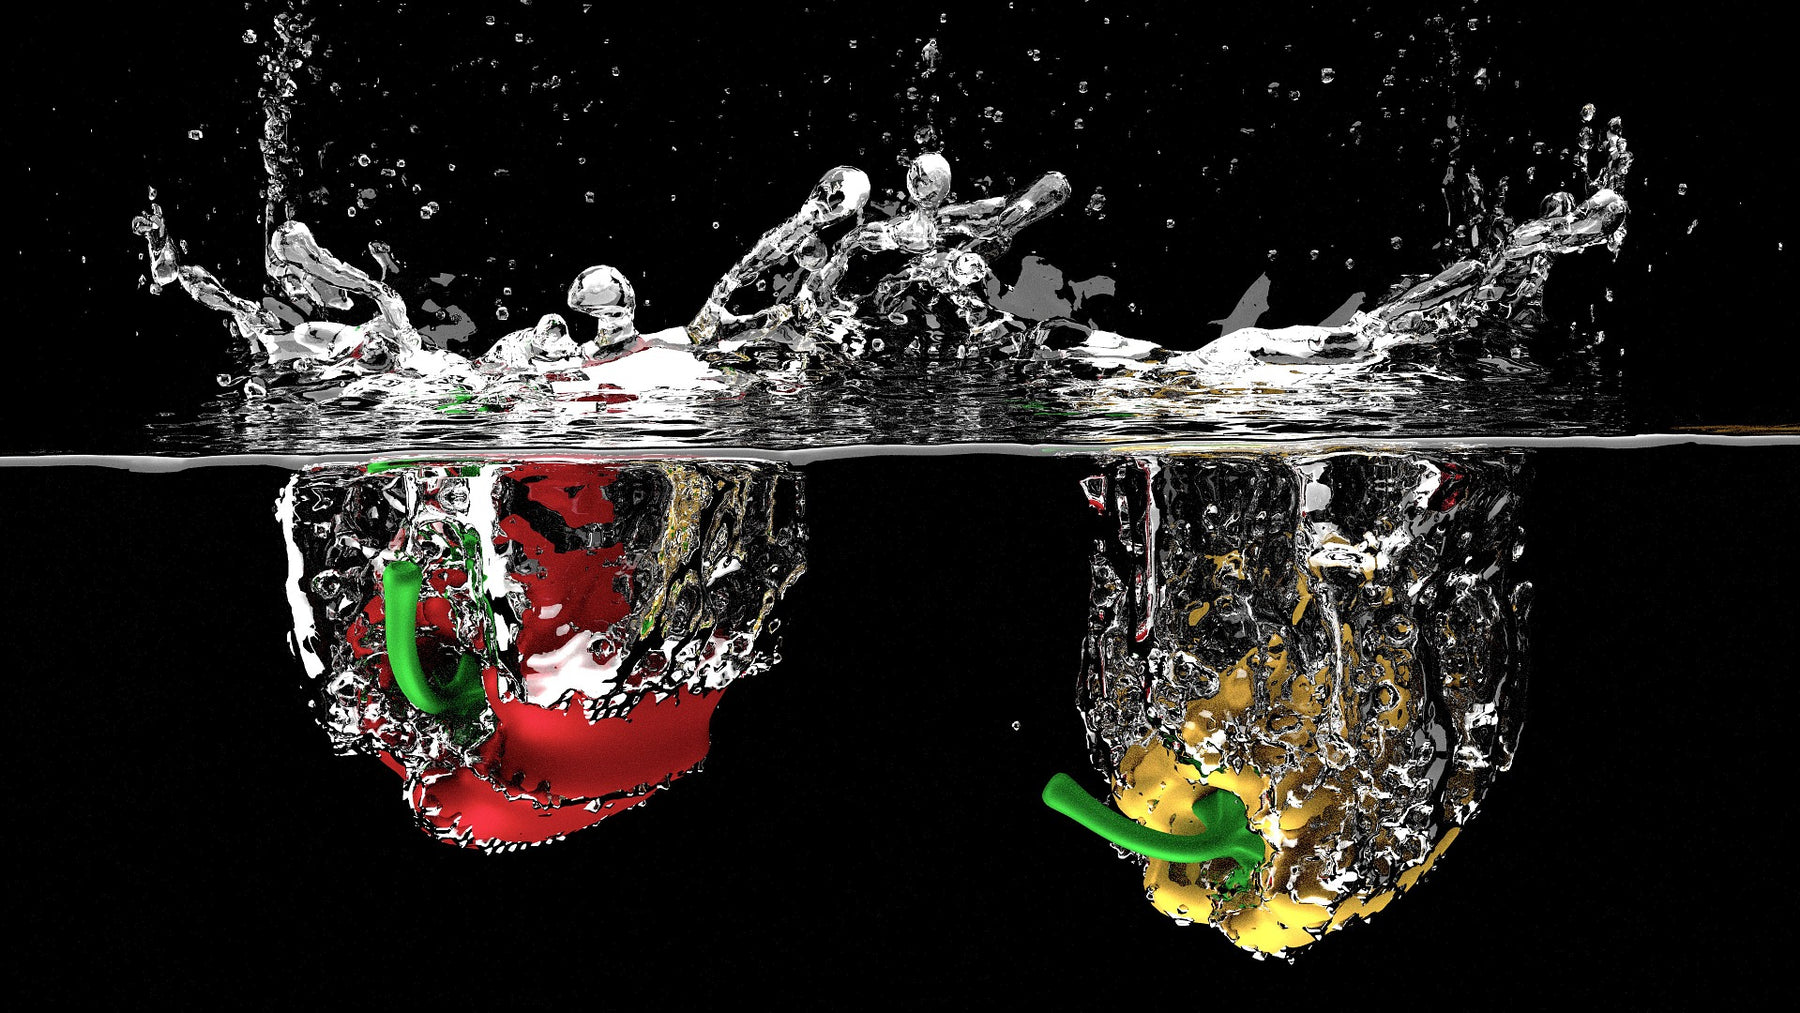 Red bell pepper and yellow bell pepper dropped into water